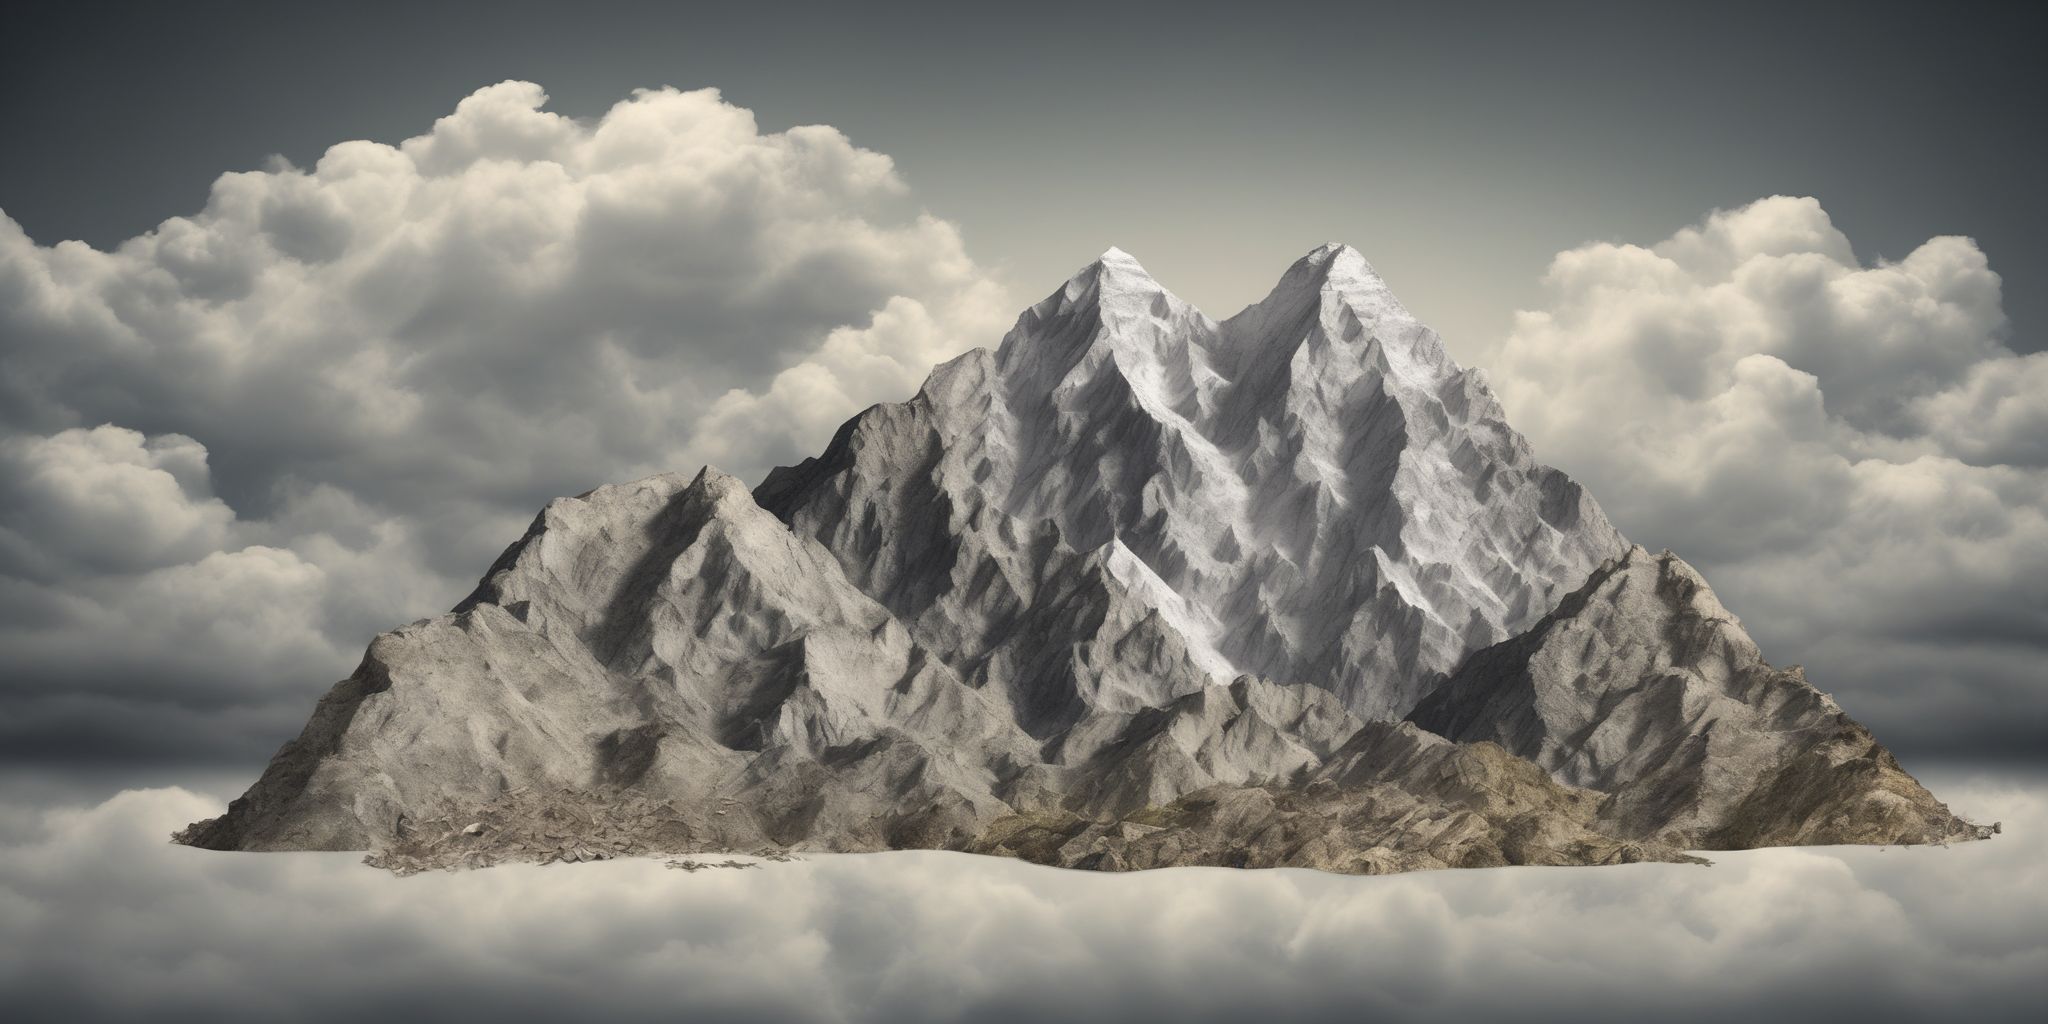 Debt mountain  in realistic, photographic style